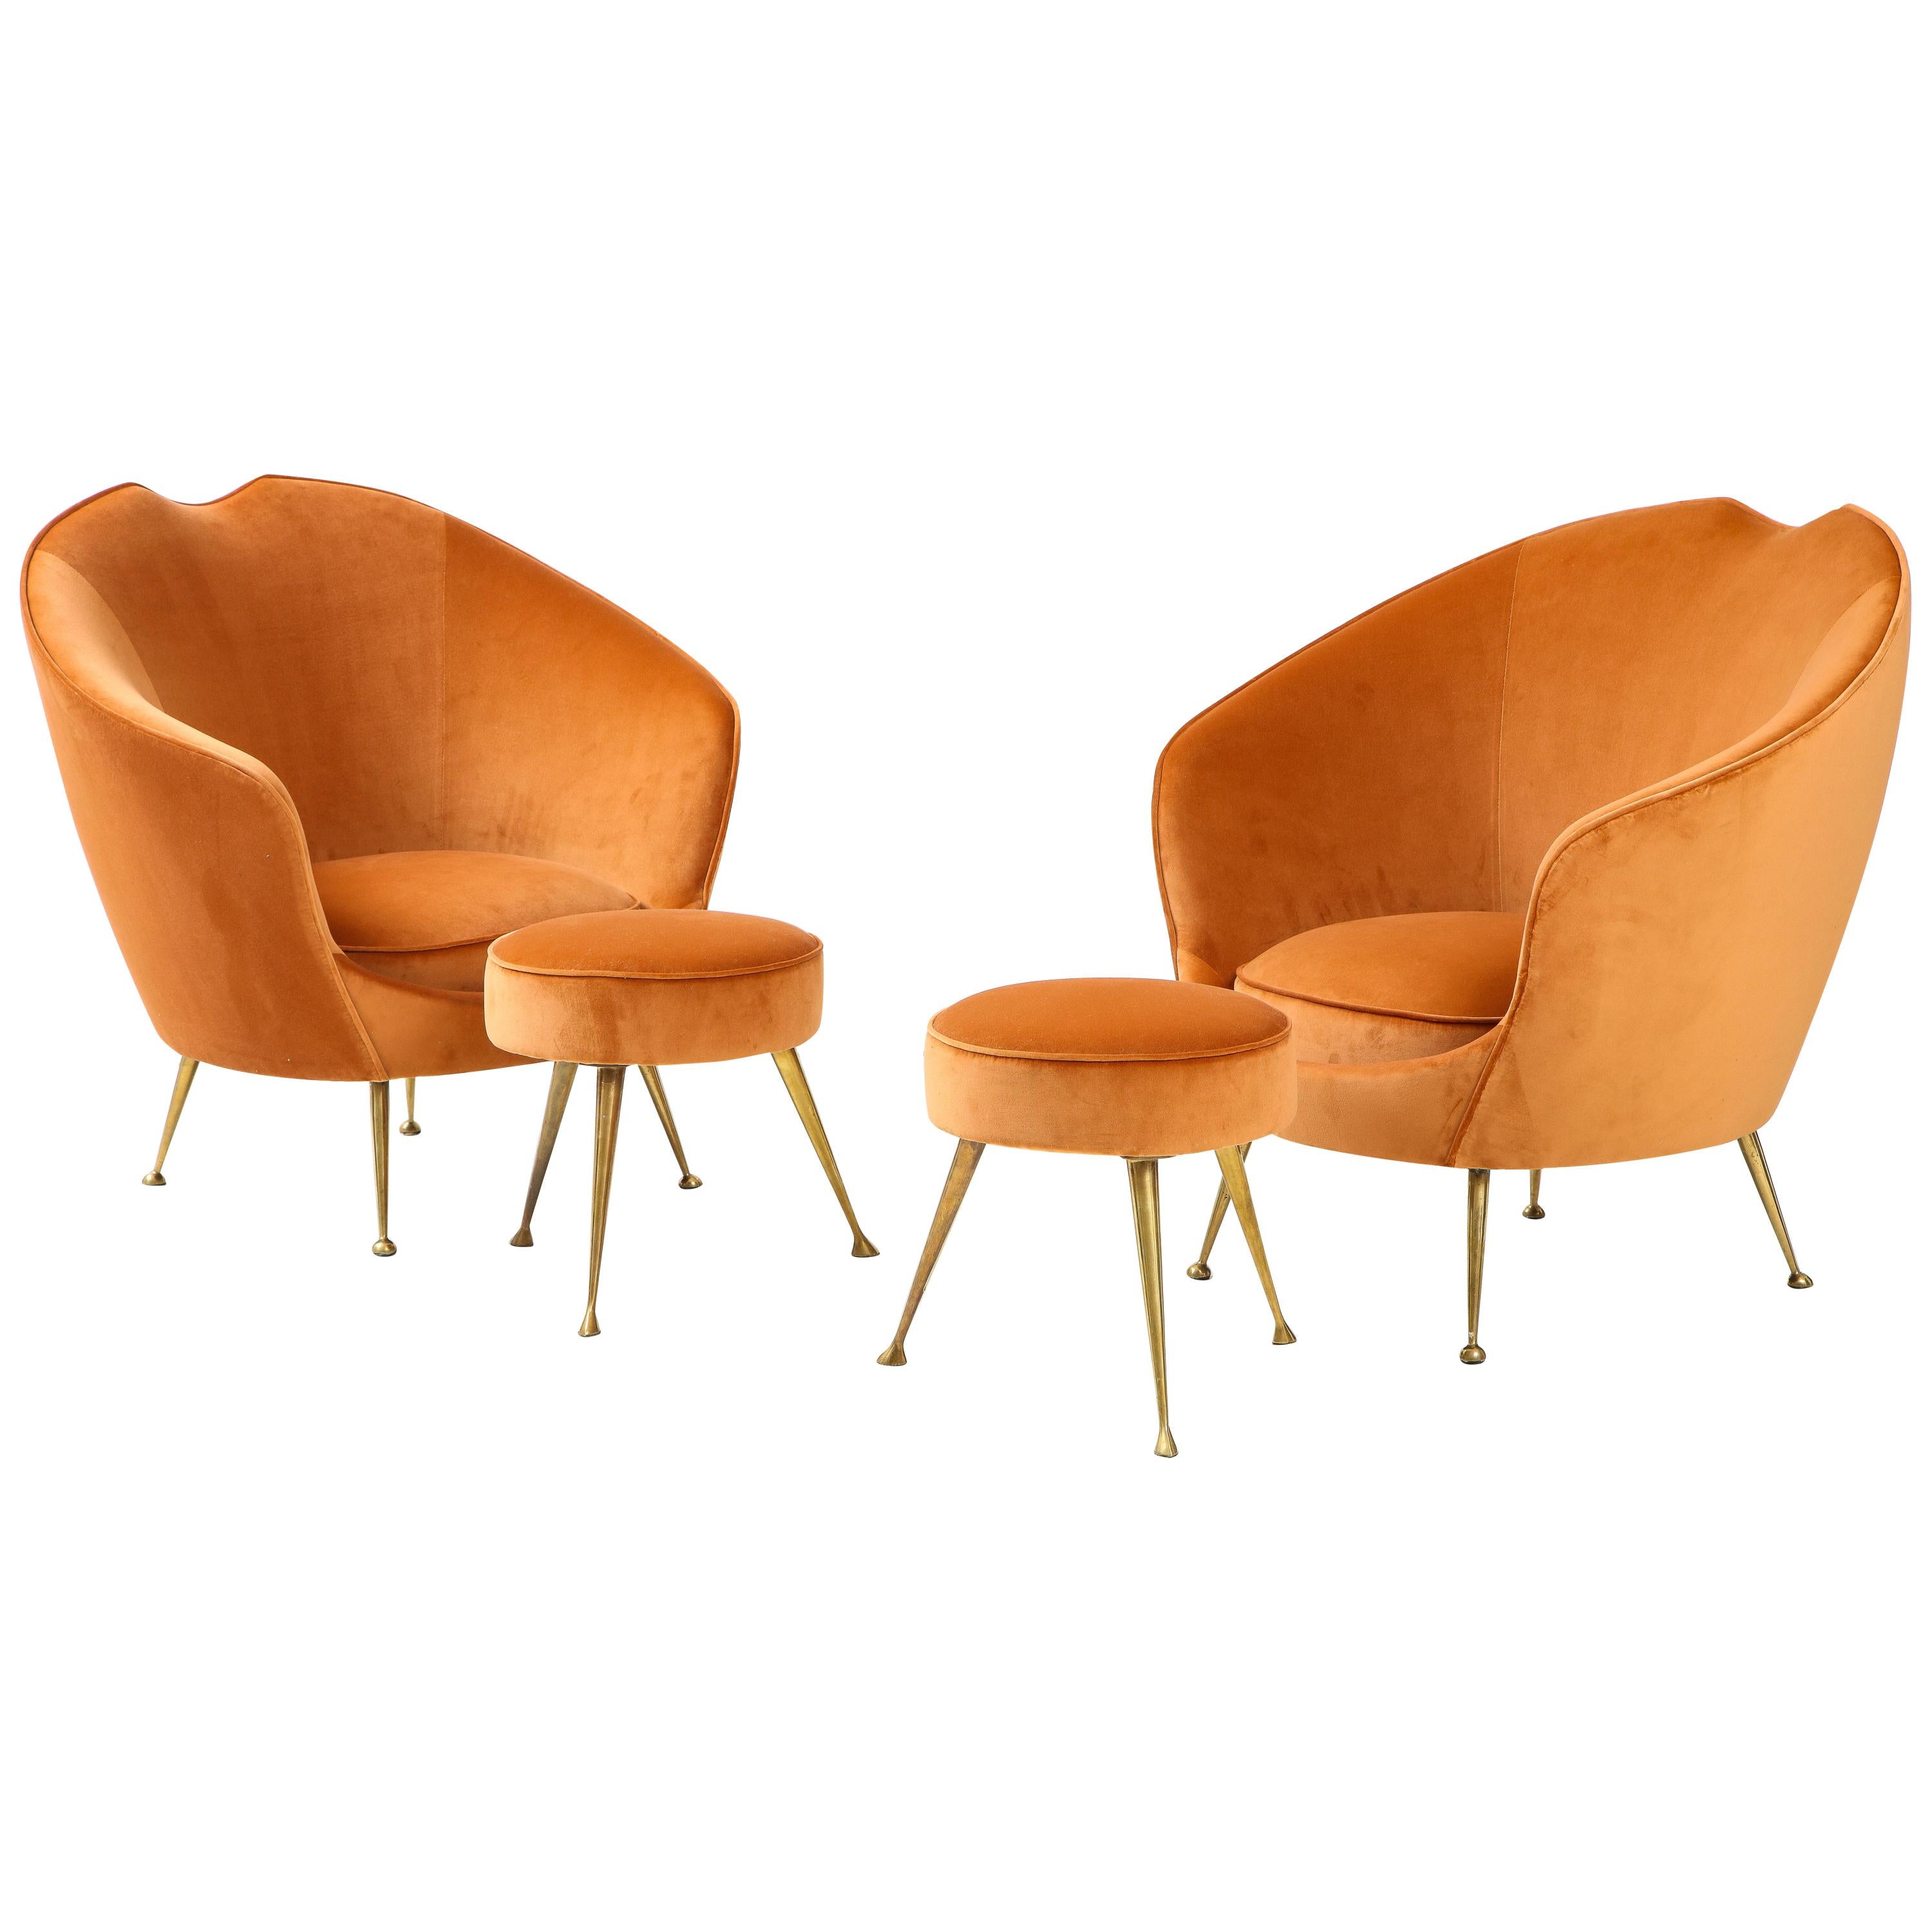 Pair of Italian Lounge Chairs and Matching Stools by I.S.A. Bergamo